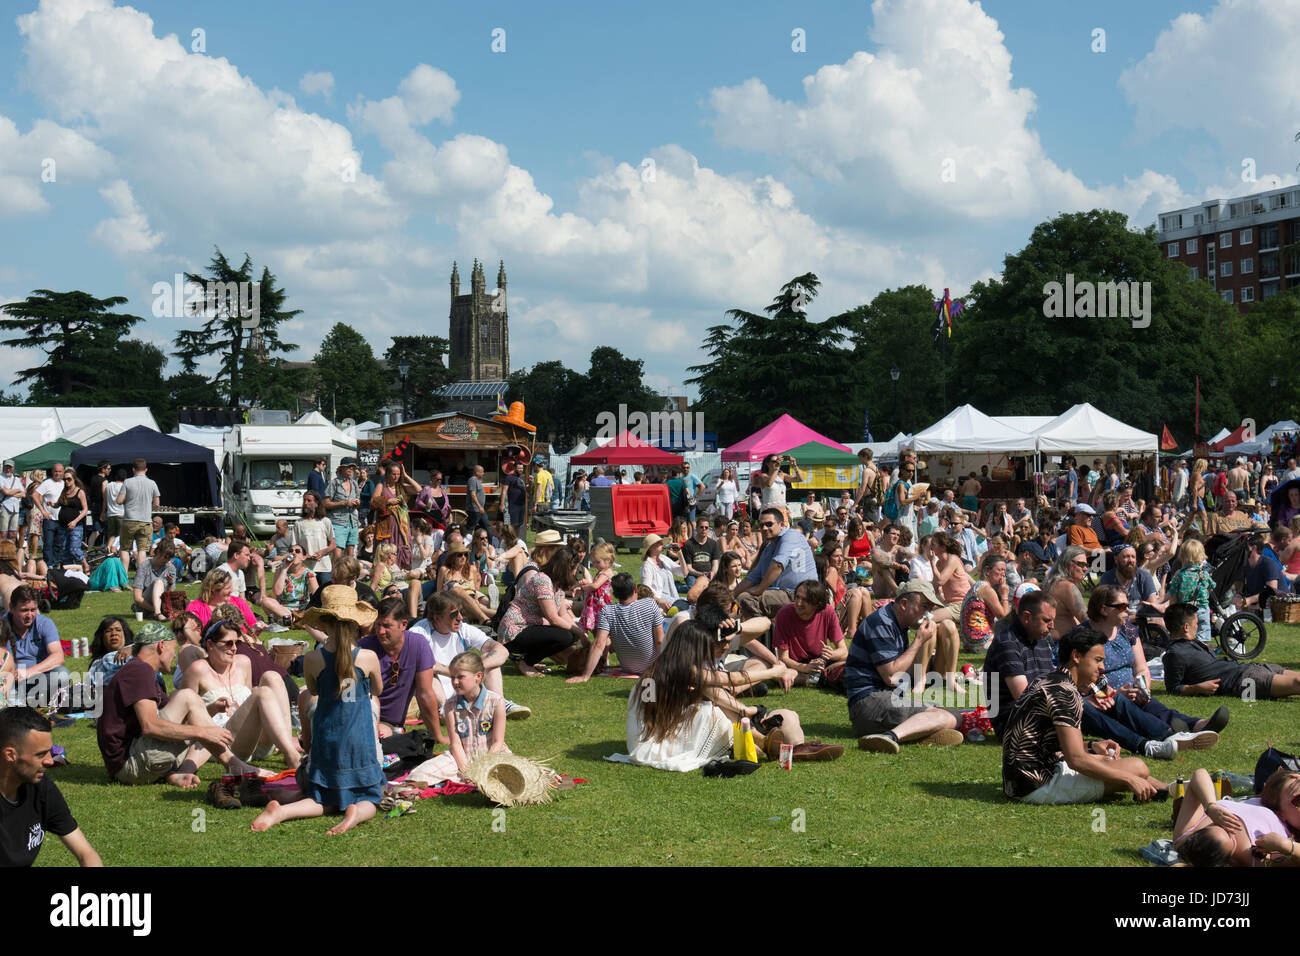 Leamington Spa, Warwickshire, England, UK. 18th June, 2017. People enjoy the sunshine at the 39th Leamington Peace Festival. The annual free festival was held over the weekend of 17th/18th June in the Pump Room Gardens in Leamington Spa. The festival included music on the Riverside Stage and the Bandstand, as well as workshops, peace talks and children`s entertainment. Credit: Colin Underhill/Alamy Live News Stock Photo